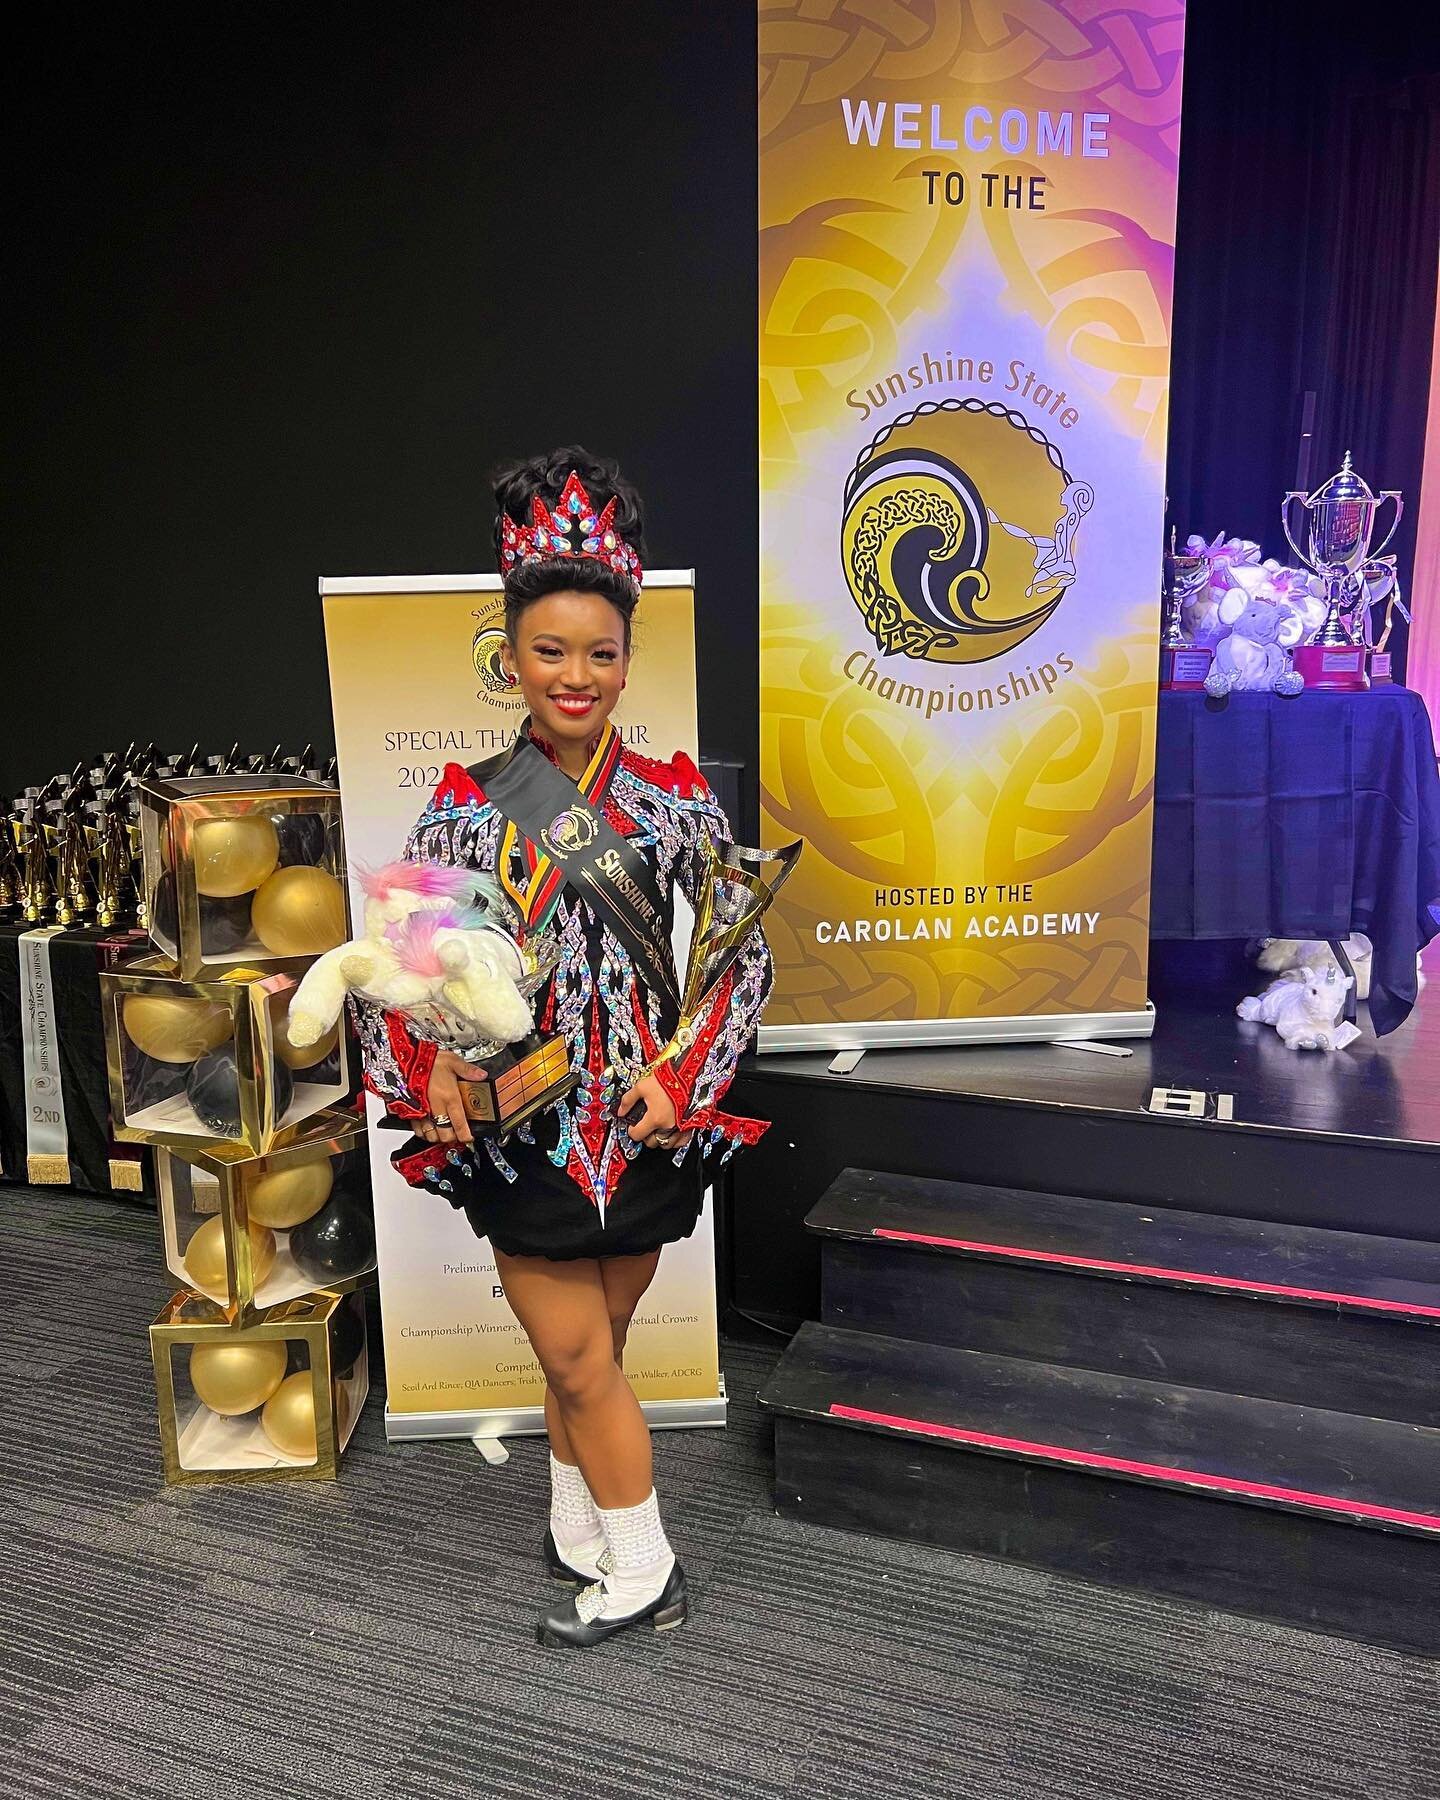 🌹 MELINA LIDDLE 🌹
🏆 19 YEARS &amp; OVER SUNSHINE STATE CHAMPION 🏆

Congratulations to Melina on her second consecutive Senior Championship win at the Sunshine State Championships 2023 with 💯 💯 💯 ! Melina, we just love to watch you dance and yo